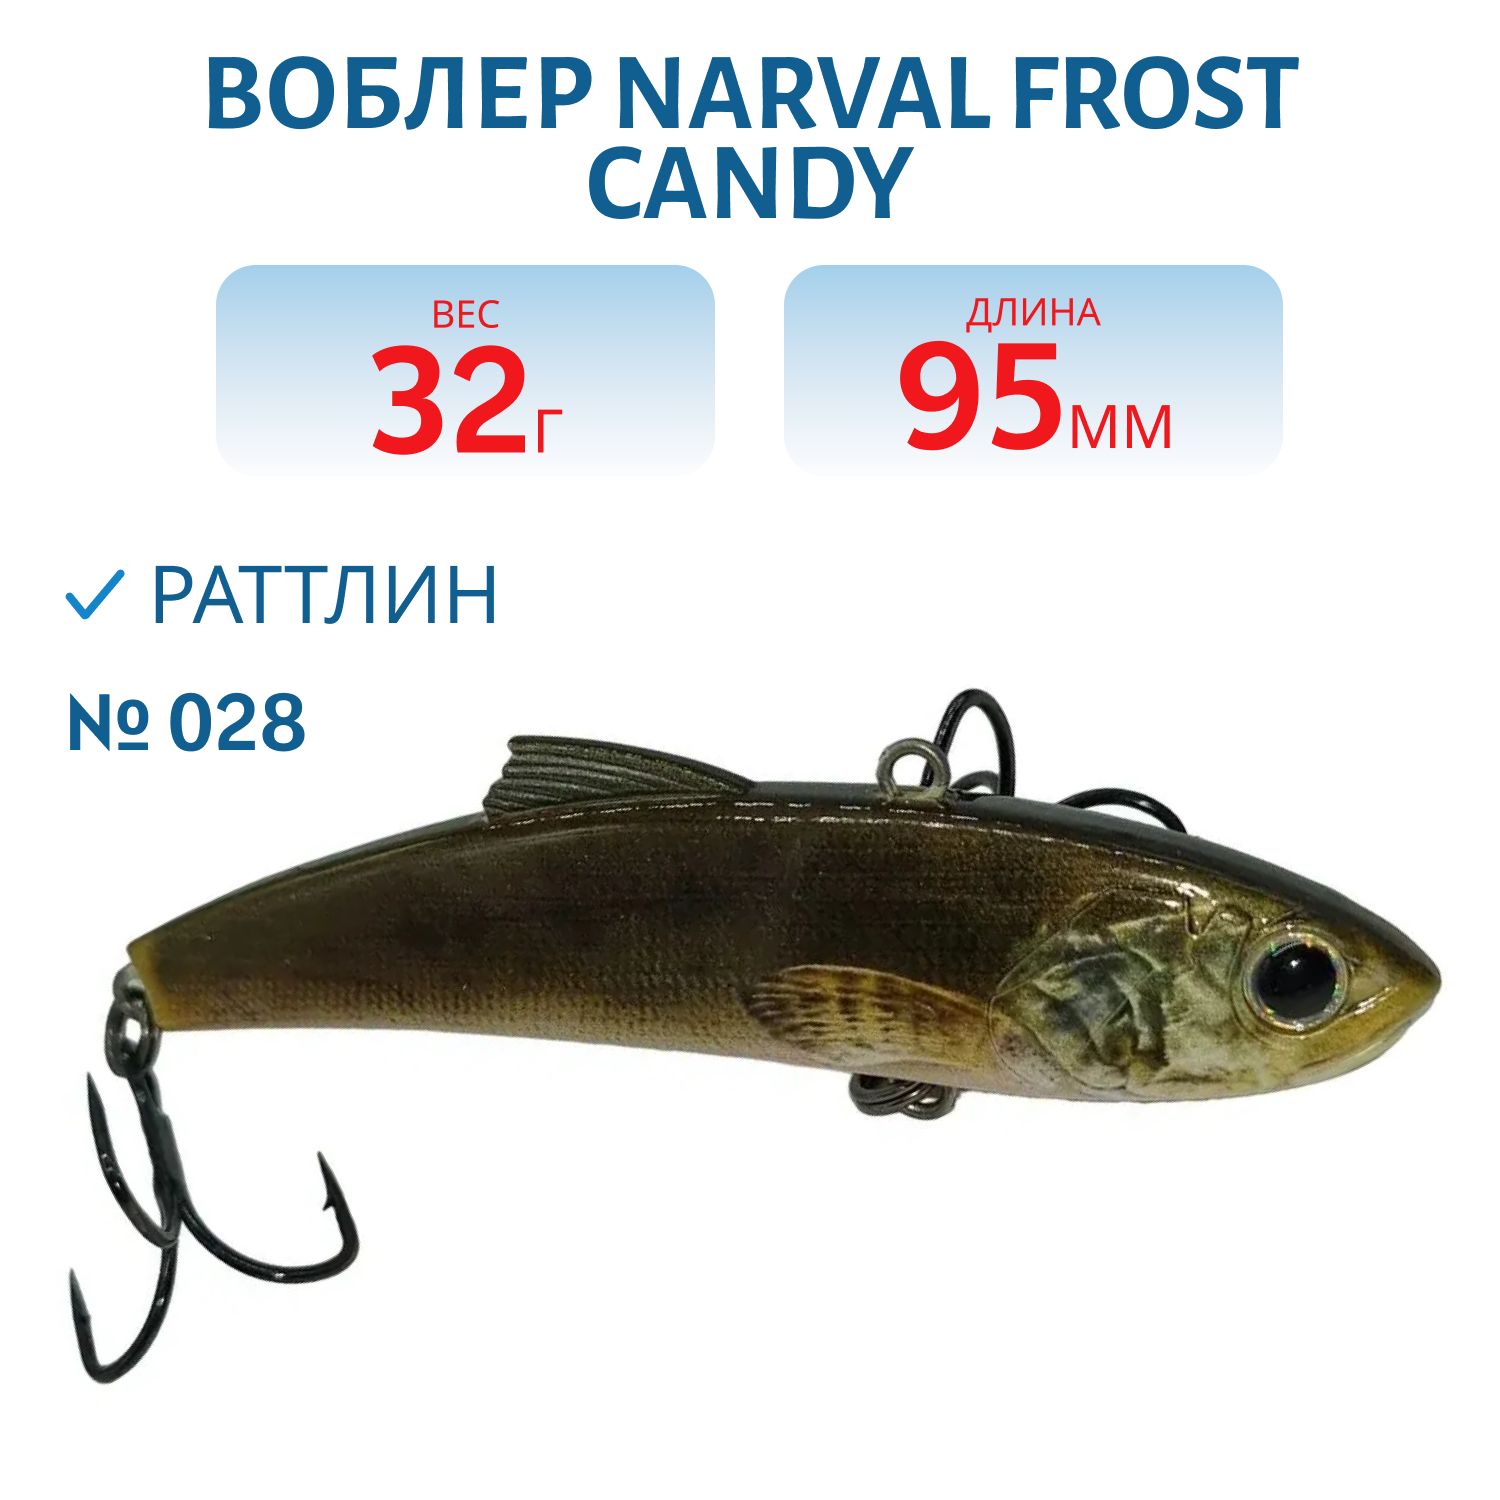 Раттлин Narval Frost Candy Vib 95mm 32g #028-NS Ruff